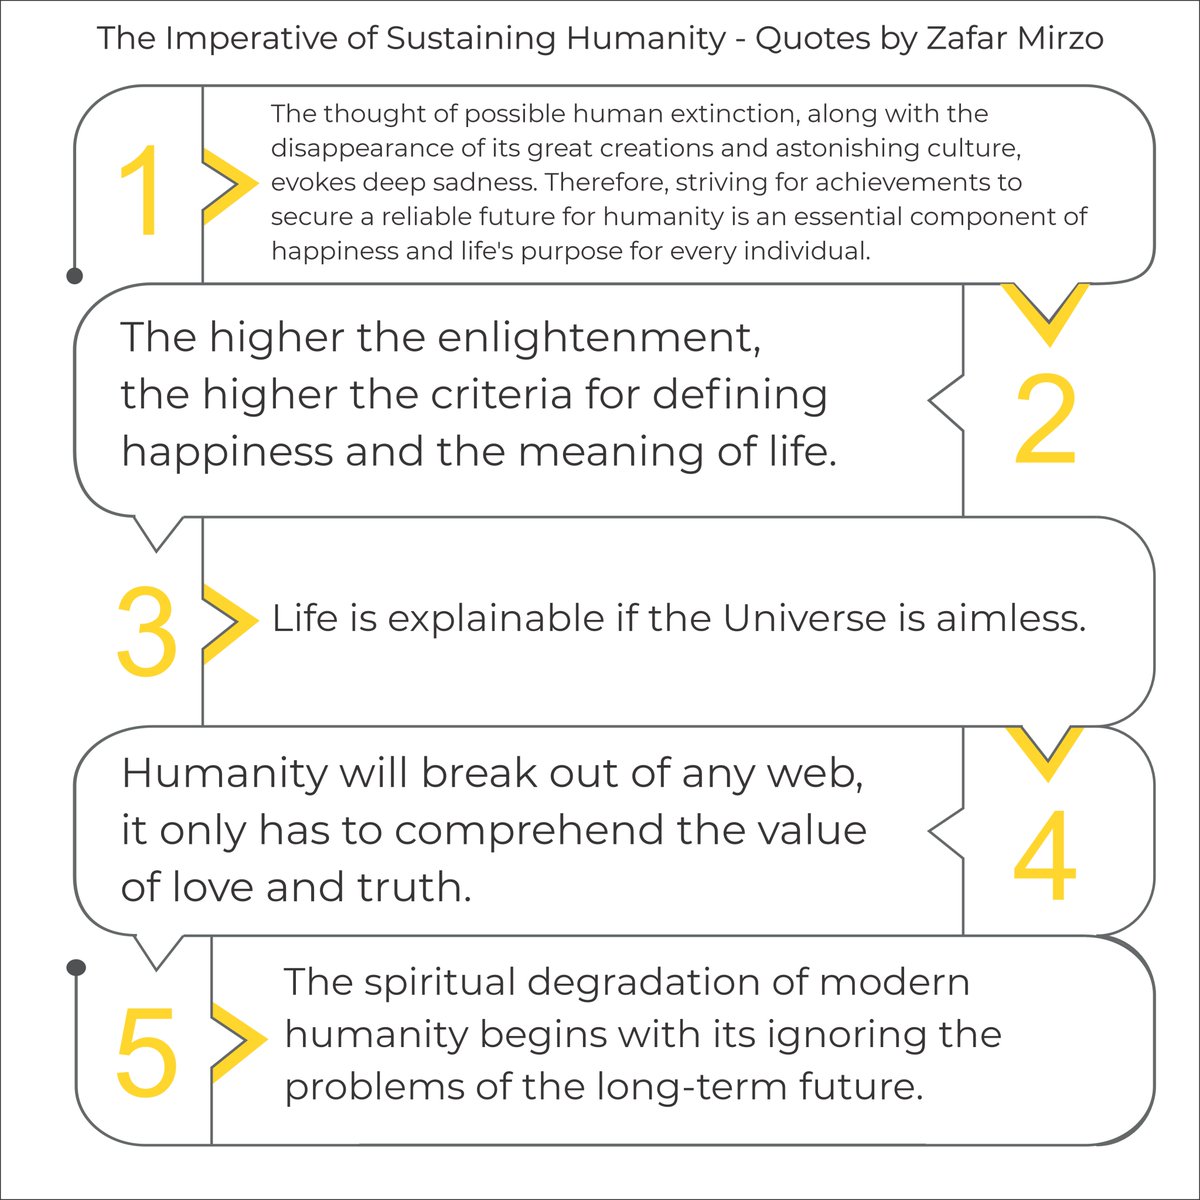 The Imperative of Sustaining Humanity - Quotes by Zafar Mirzo @zafarmirzo 

1. The thought of possible human extinction, along with the disappearance of its great creations and astonishing culture, evokes deep sadness. Therefore, striving for achievements to secure a reliable…